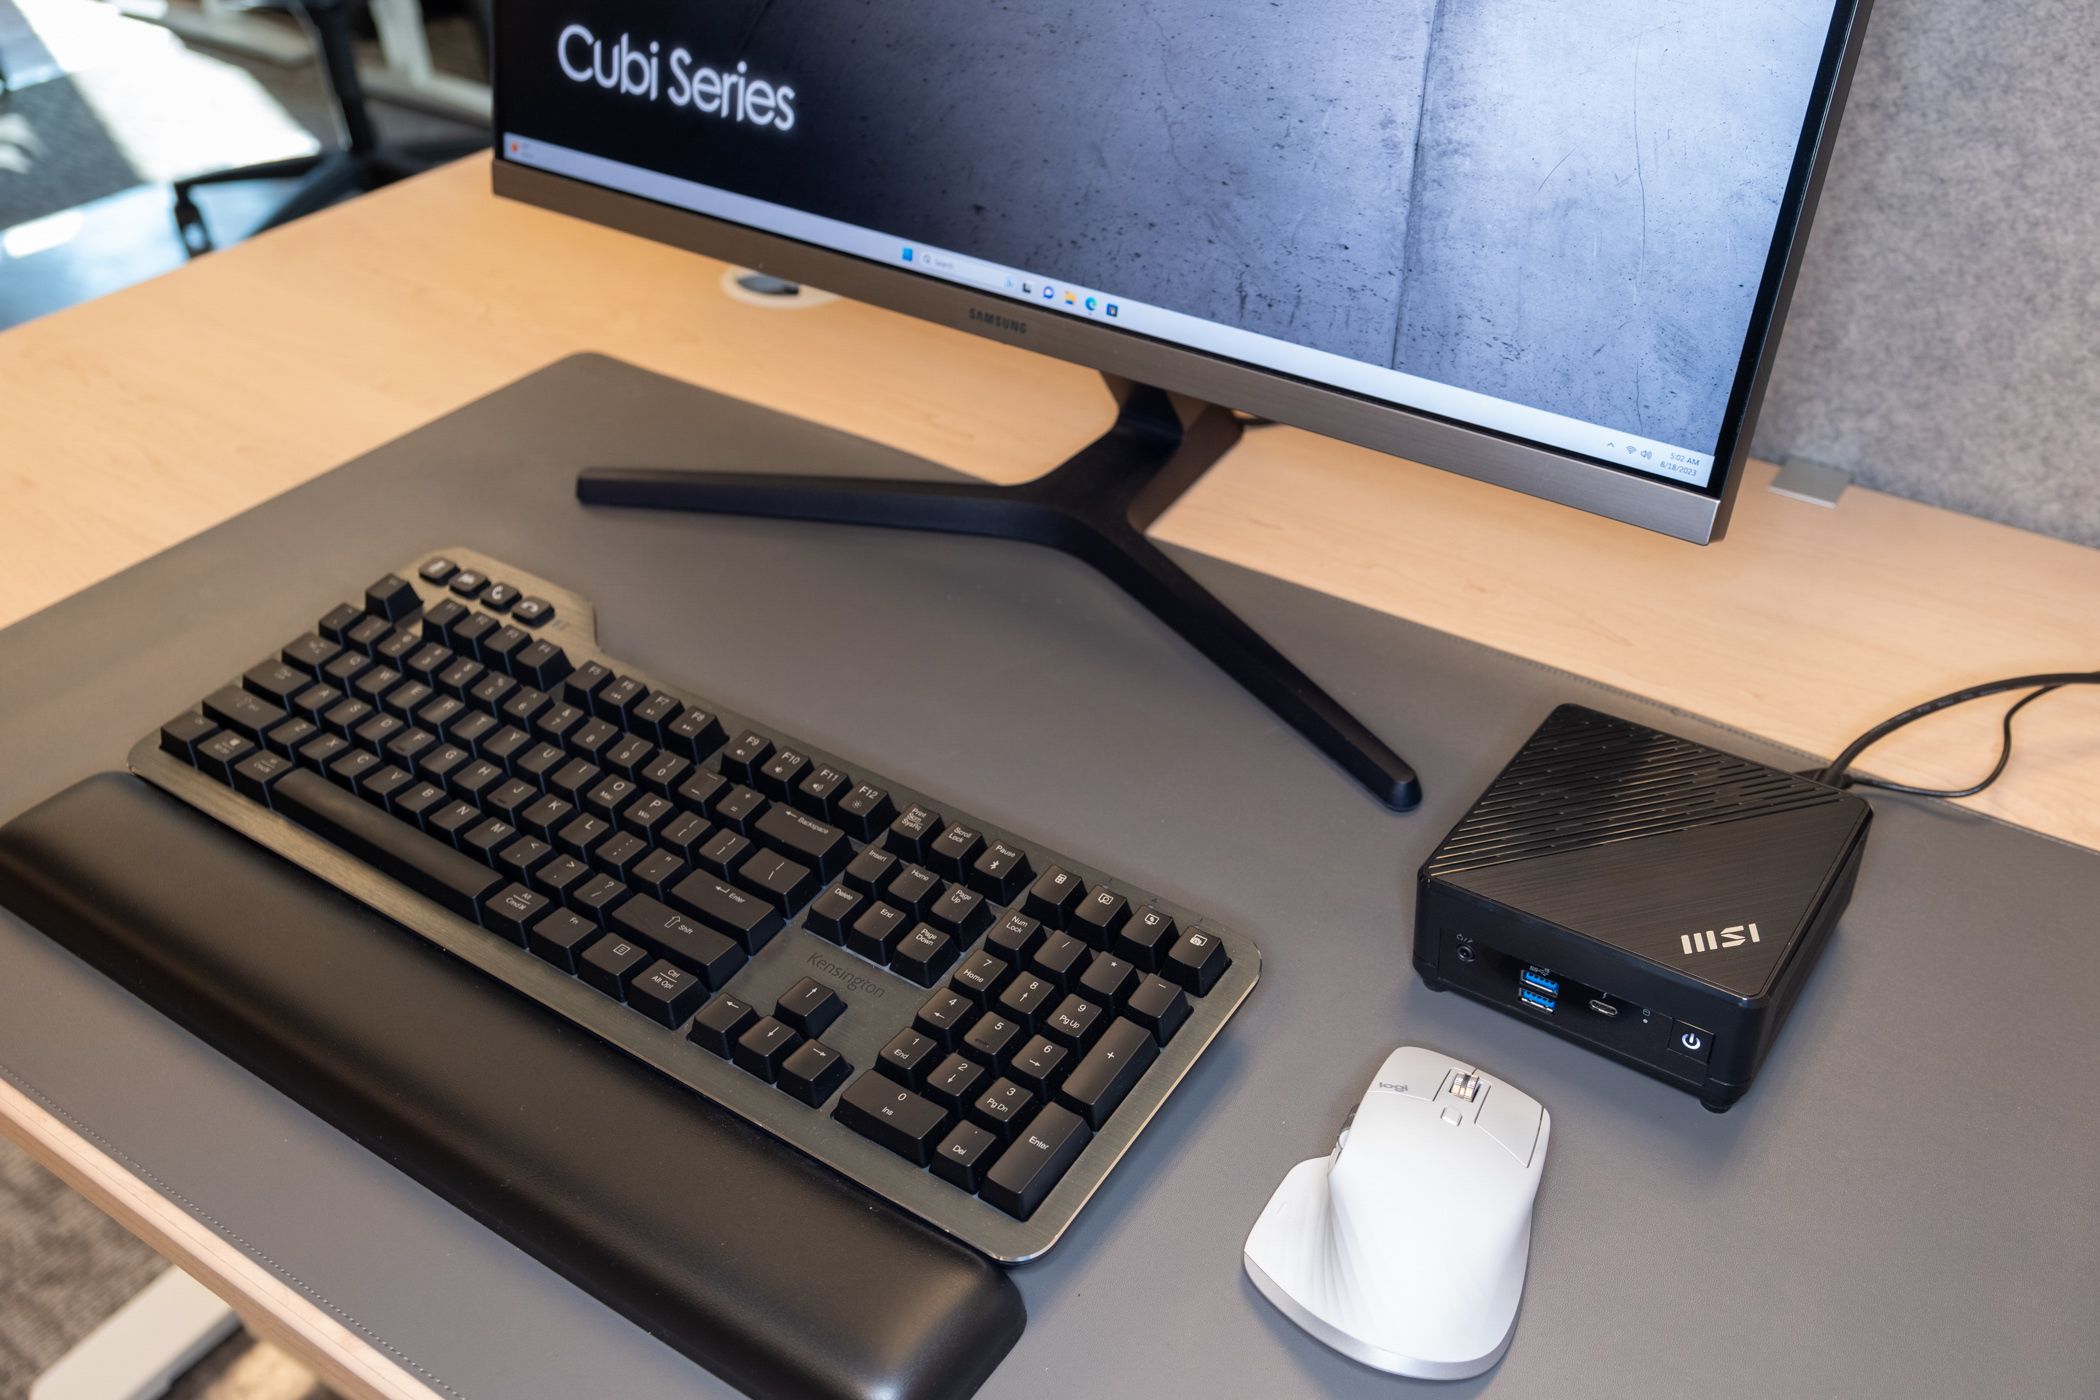 MSI Cube 5 12M behind a mouse and near a keyboard and monitor